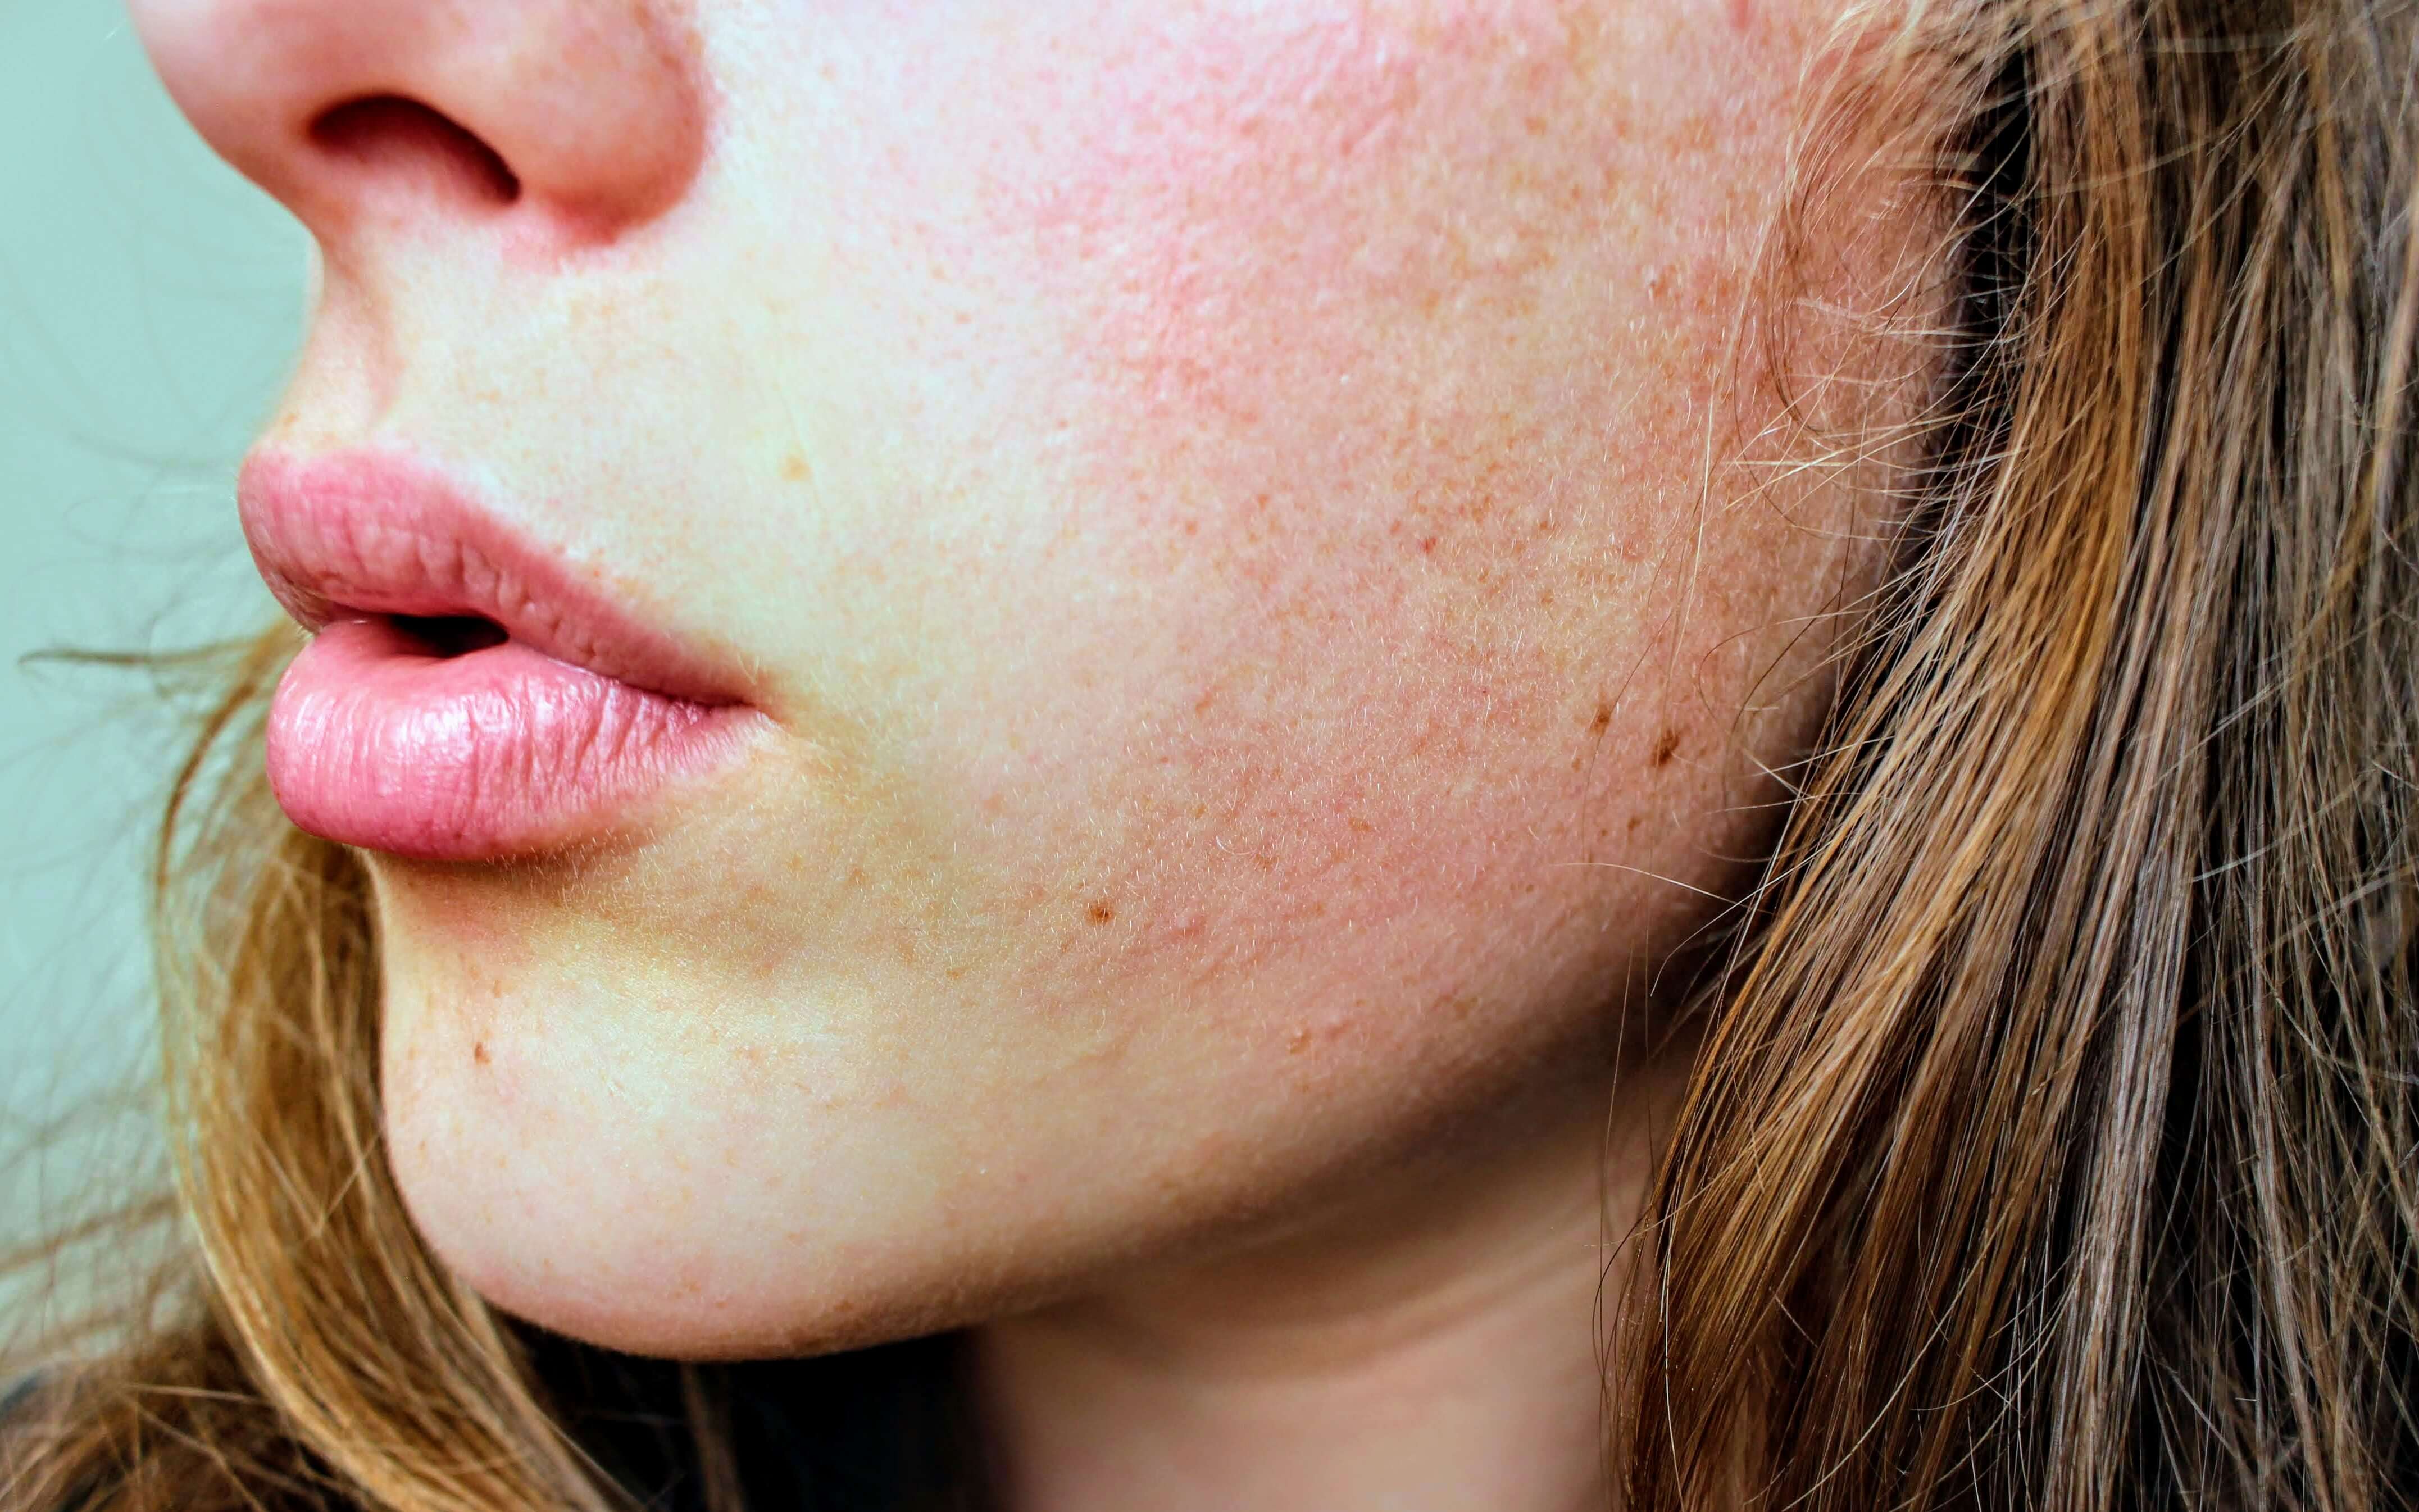 Close-up on young woman face skin with rashes